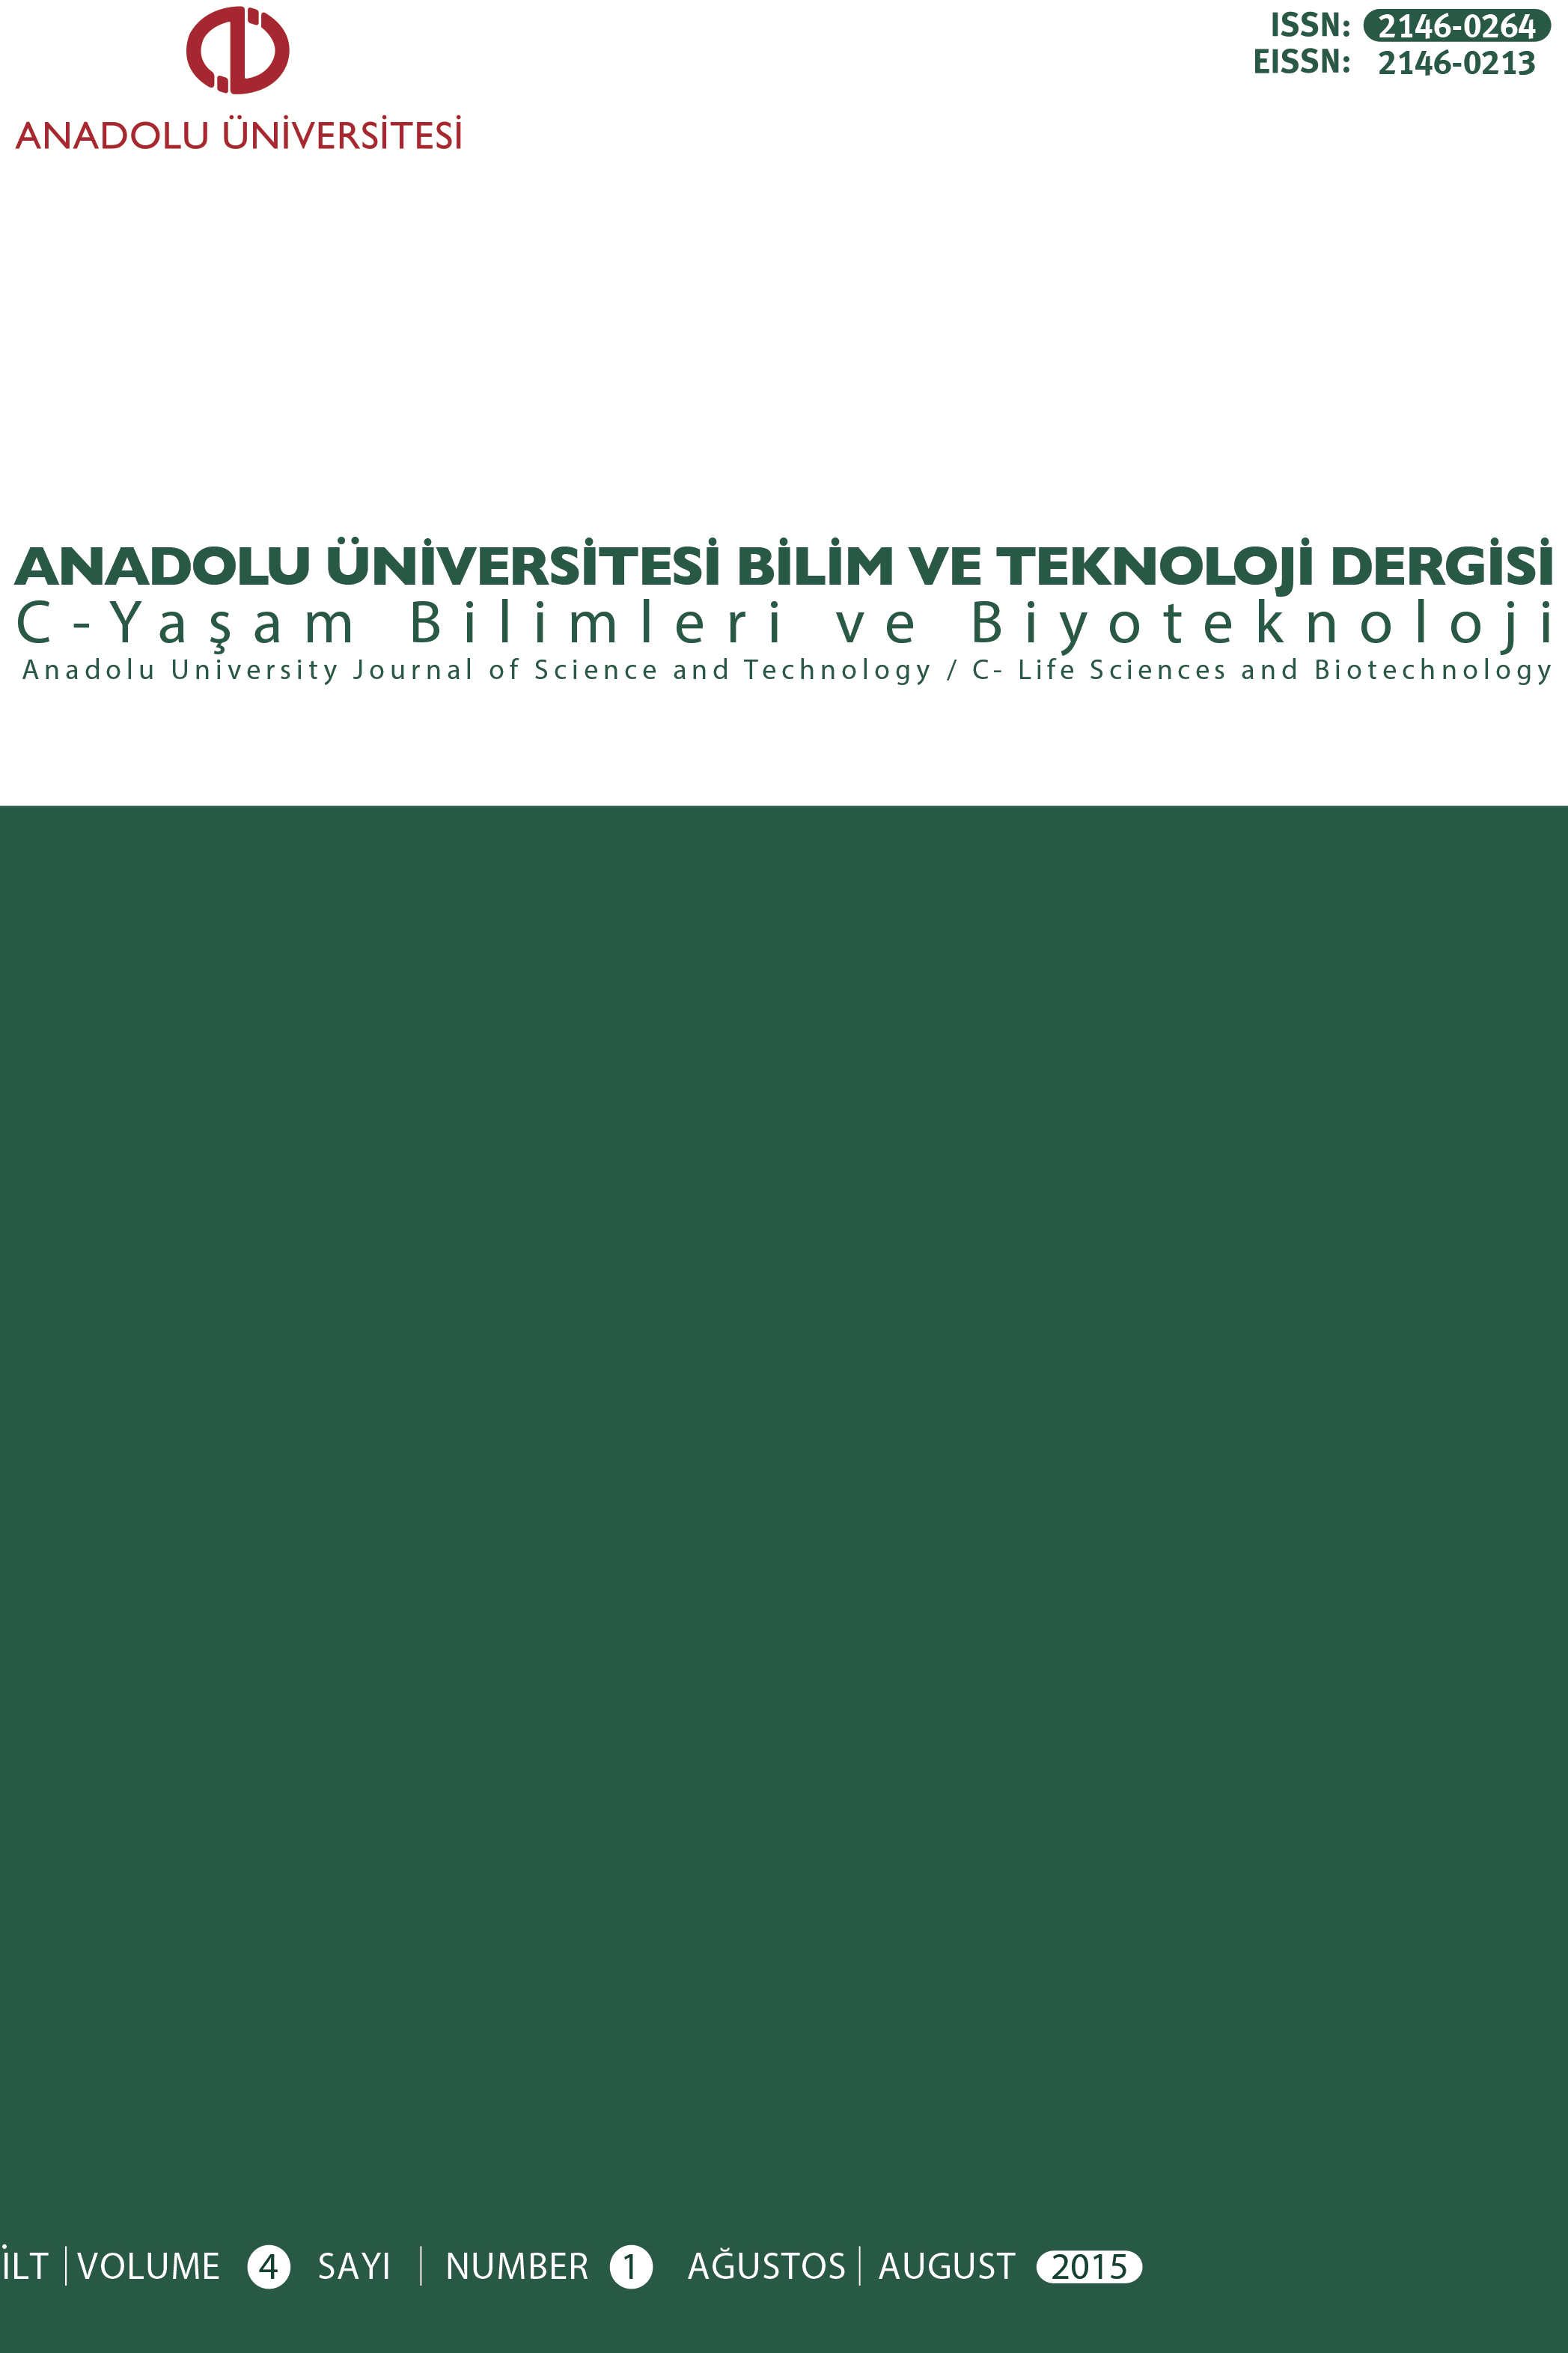 Anadolu University Journal of Science and Technology C - Life Sciences and Biotechnology